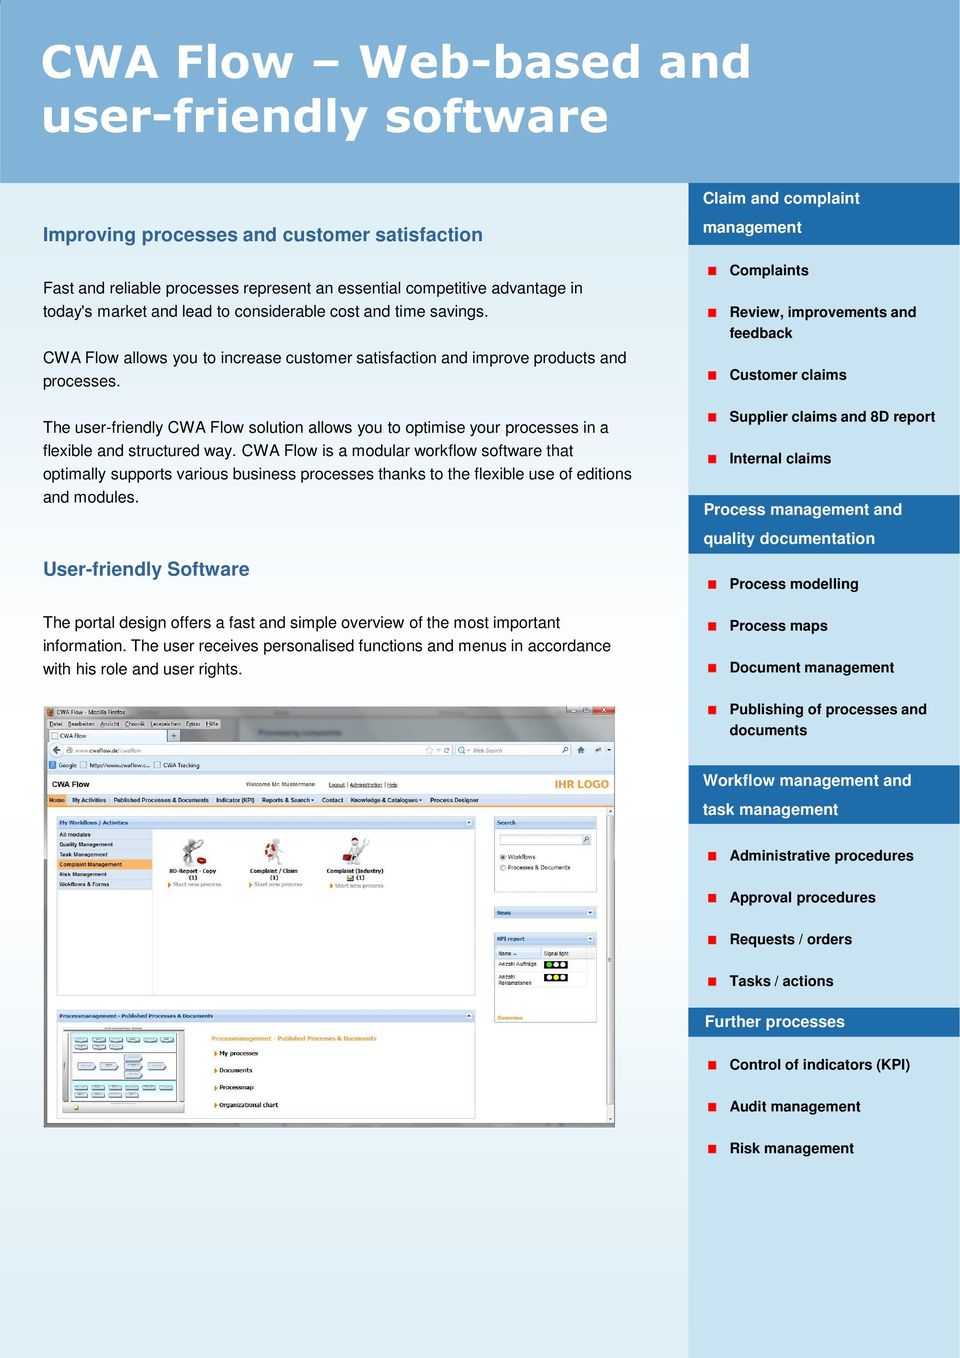 The user-friendly CWA Flow solution allows you to optimise your processes in a flexible and structured way.